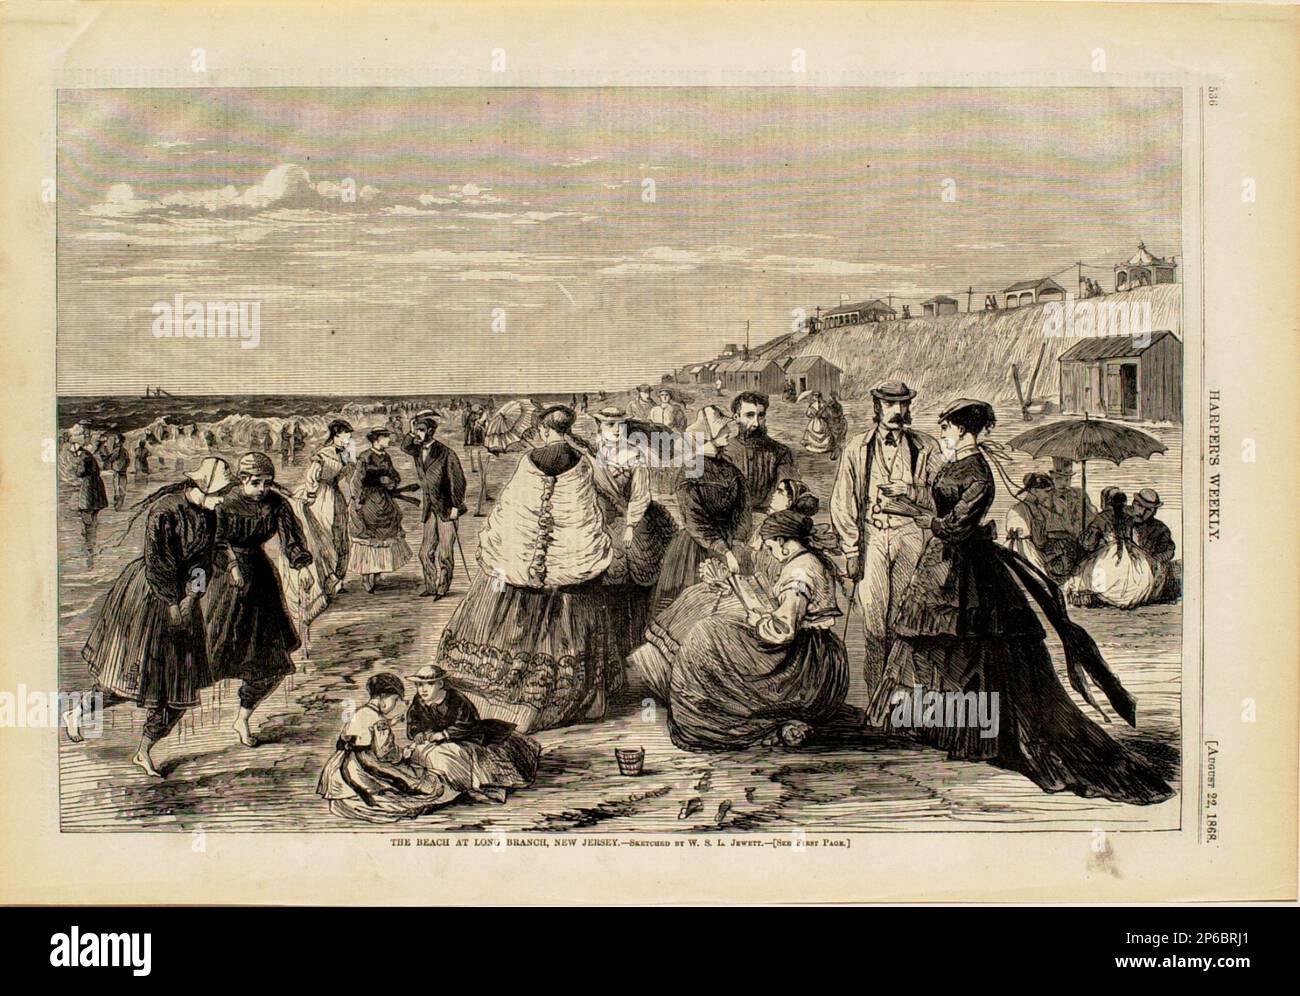 William S.L. Jewett, The Beach at Long Branch, New Jersey, 1868, wood engraving on paper. Stock Photo